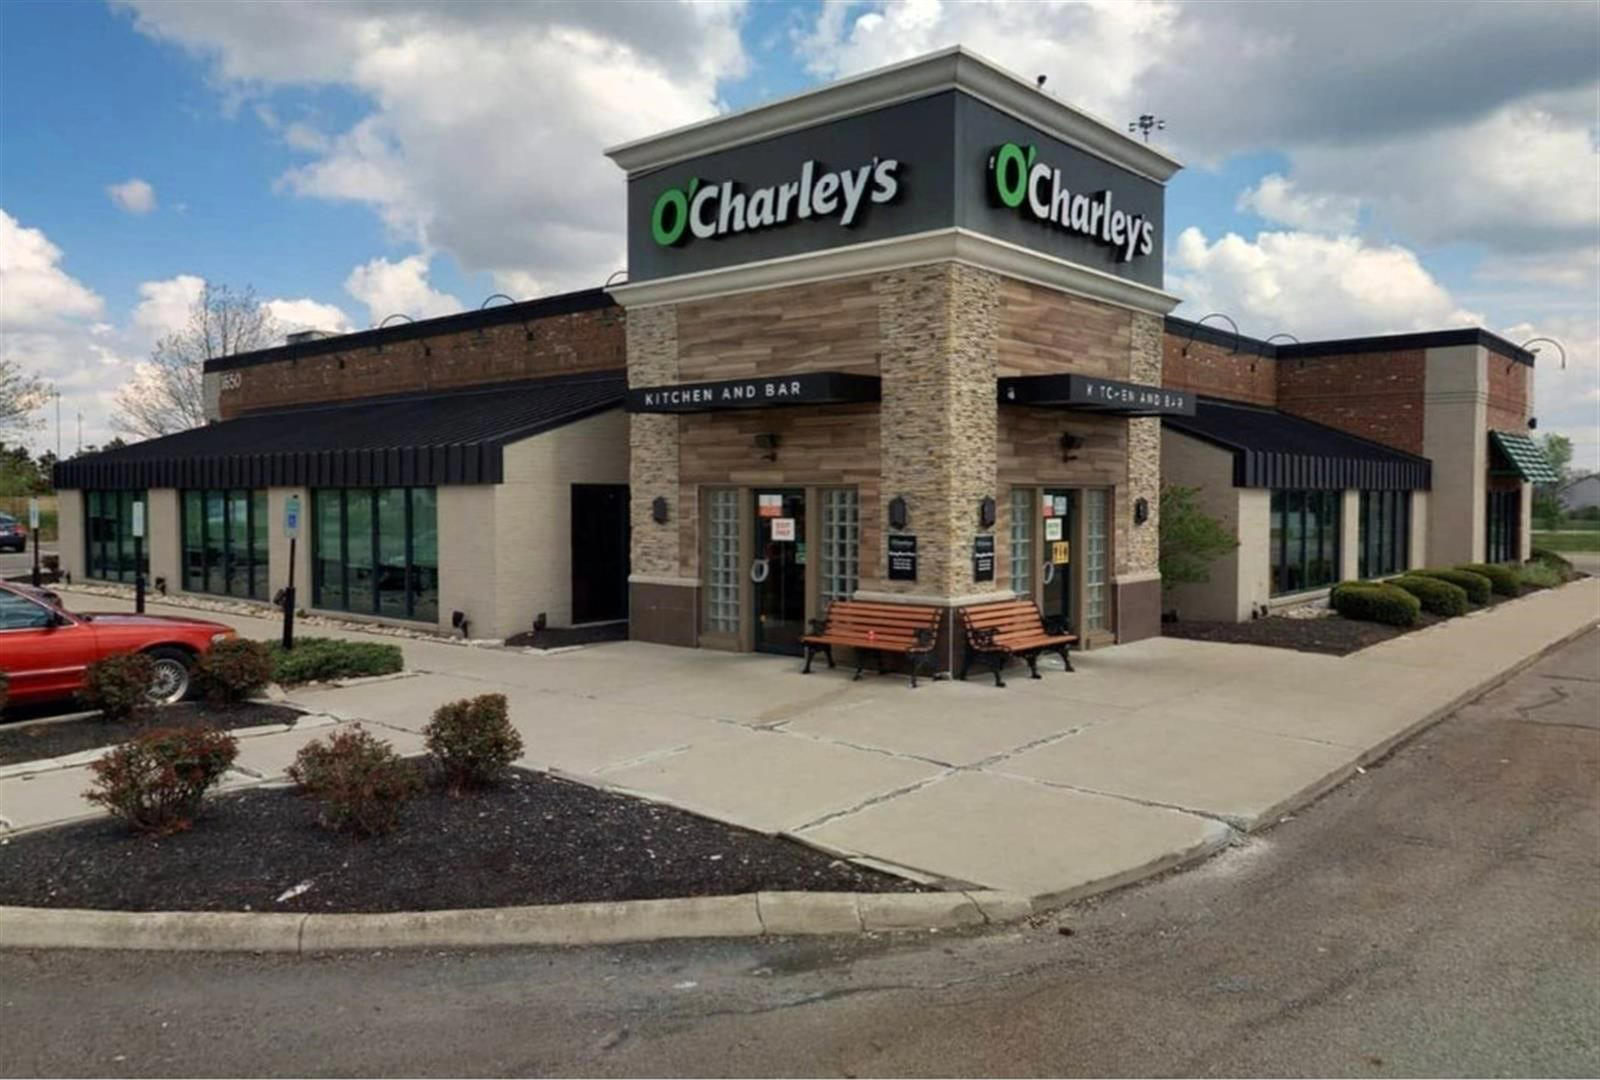 O'Charley's closes four Ohio locations, including two in Columbus